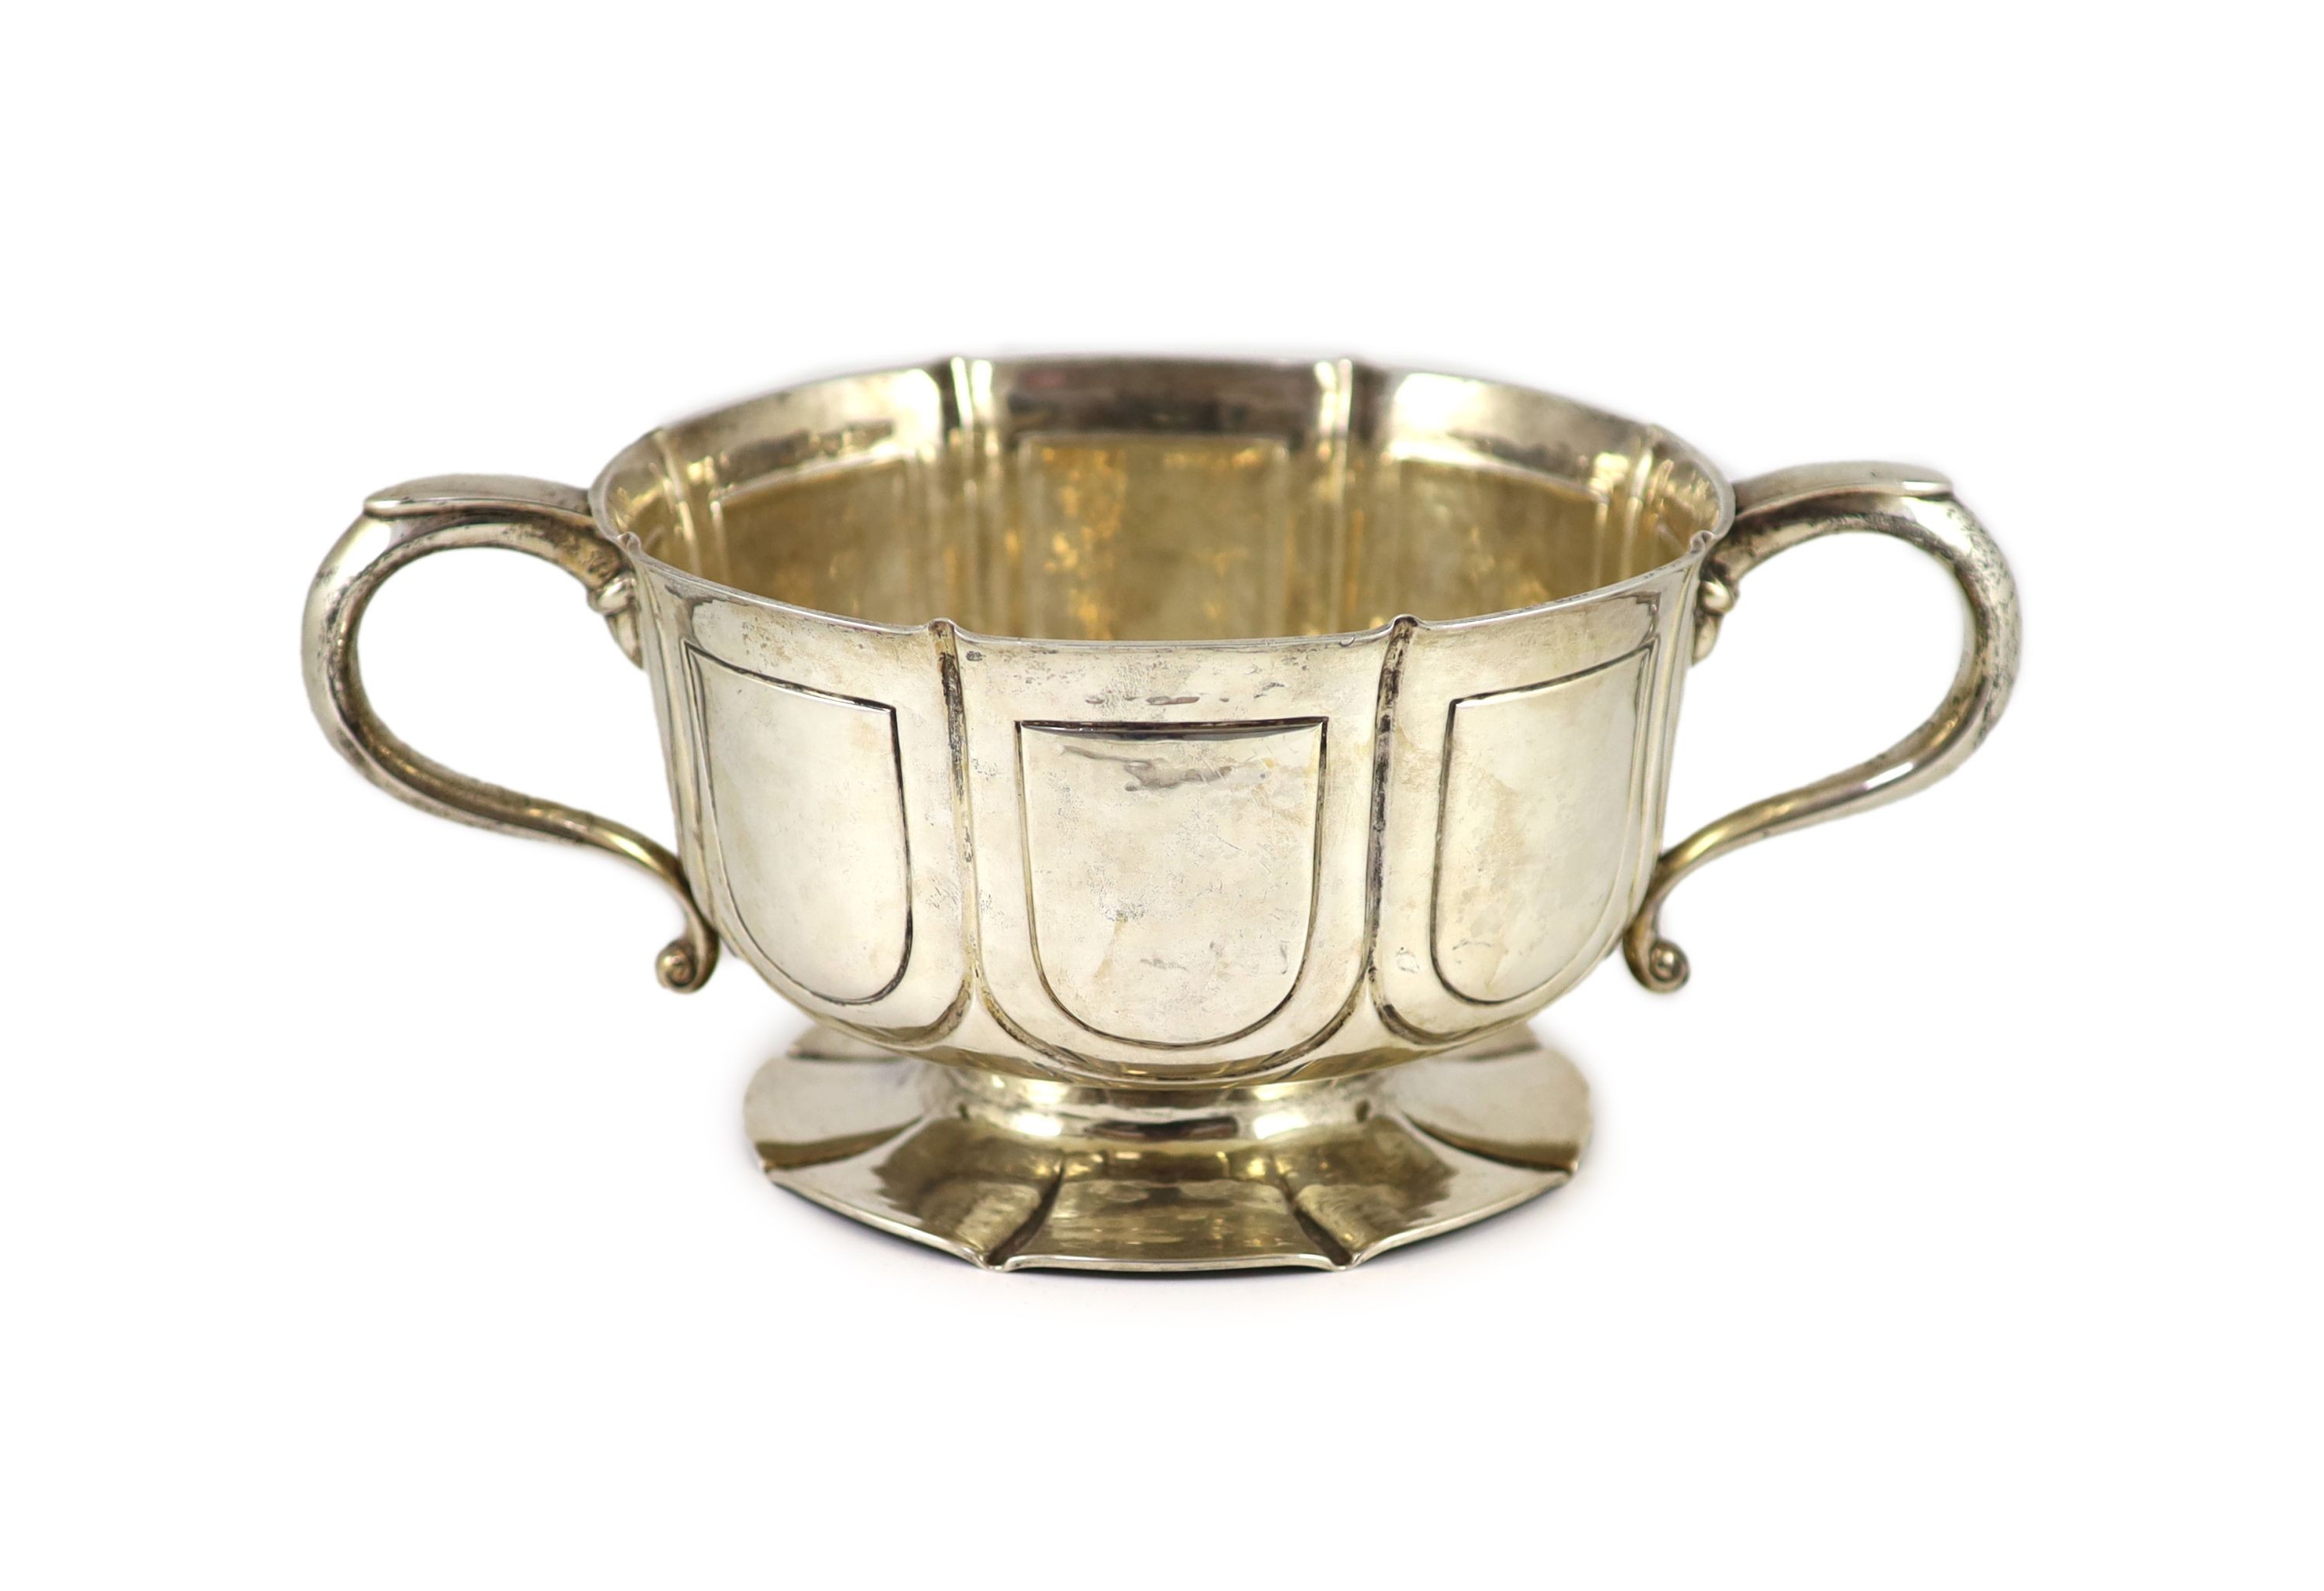 An Edwardian silver two handled pedestal fruit bowl, by William Comyns